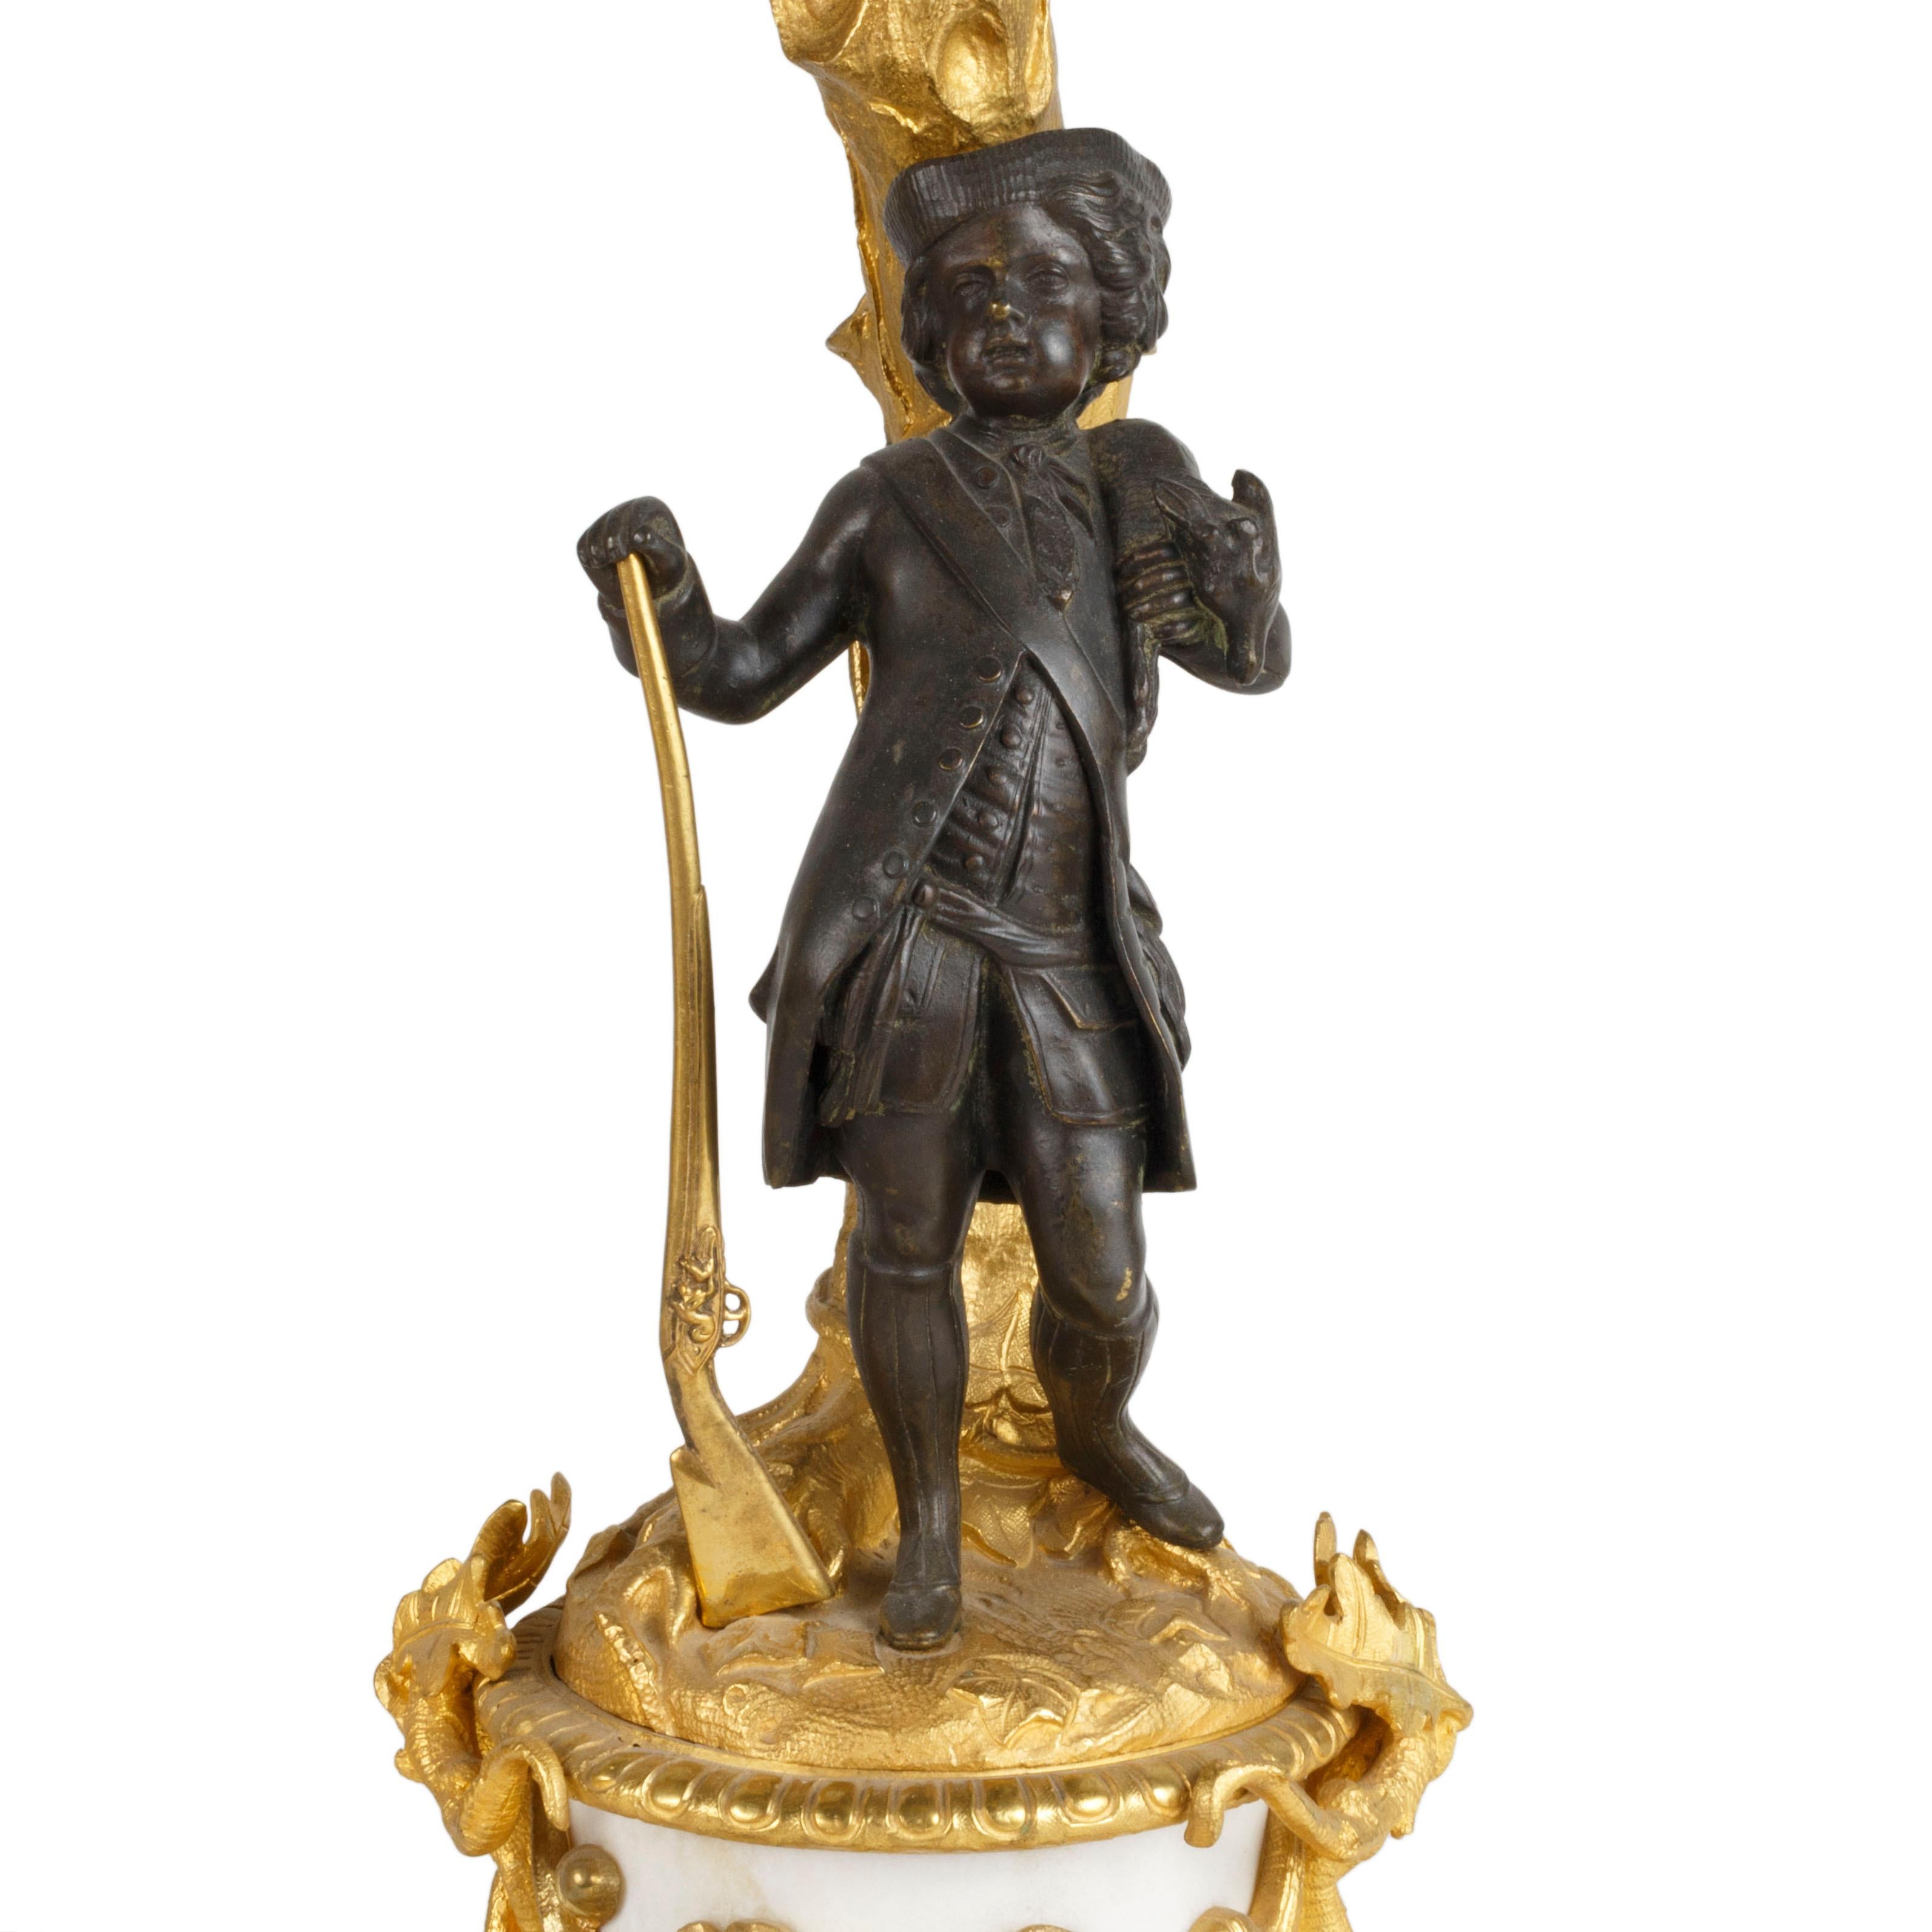 Pair of French gilded candelabras. Matched pair except one having a male hunter in bronze at base and the other a female hunter in bronze at base. In the style of Henri Picard. Marble, solid bronze, 24-karat gold gild. Measures: 17